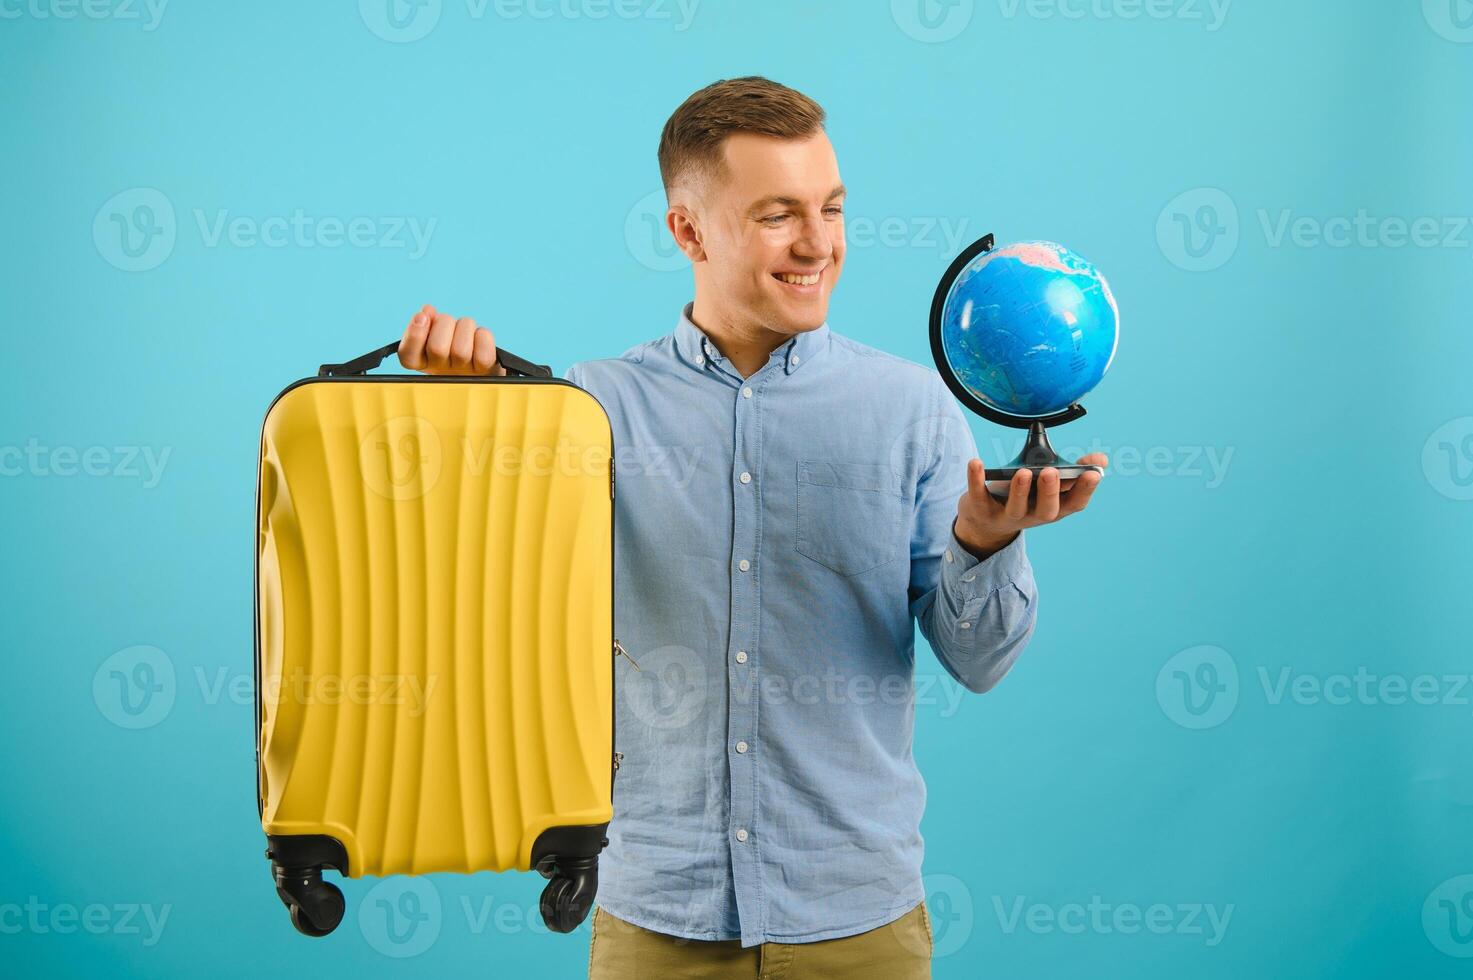 Cheerful traveler tourist man in casual clothes with suitcase isolated on blue background. Male passenger traveling abroad on weekend. Air flight journey concept Hold world globe photo